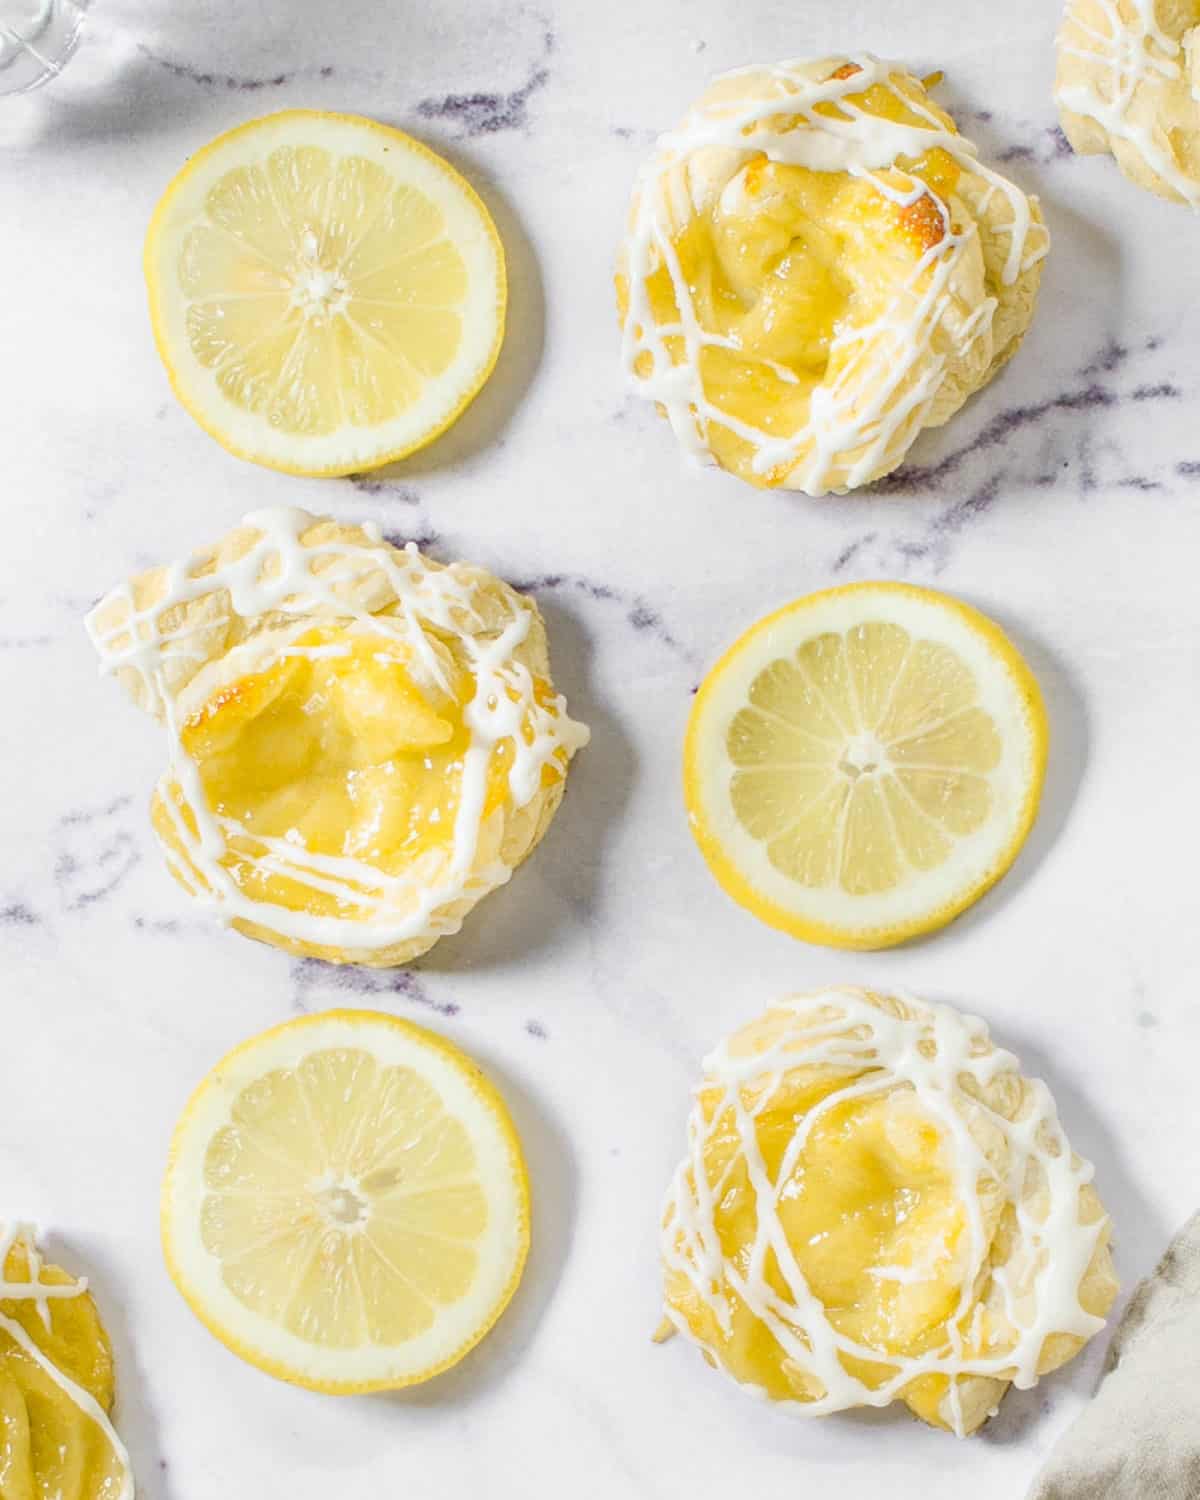 Lemon curd puff pastries spread out on a table with lemons.